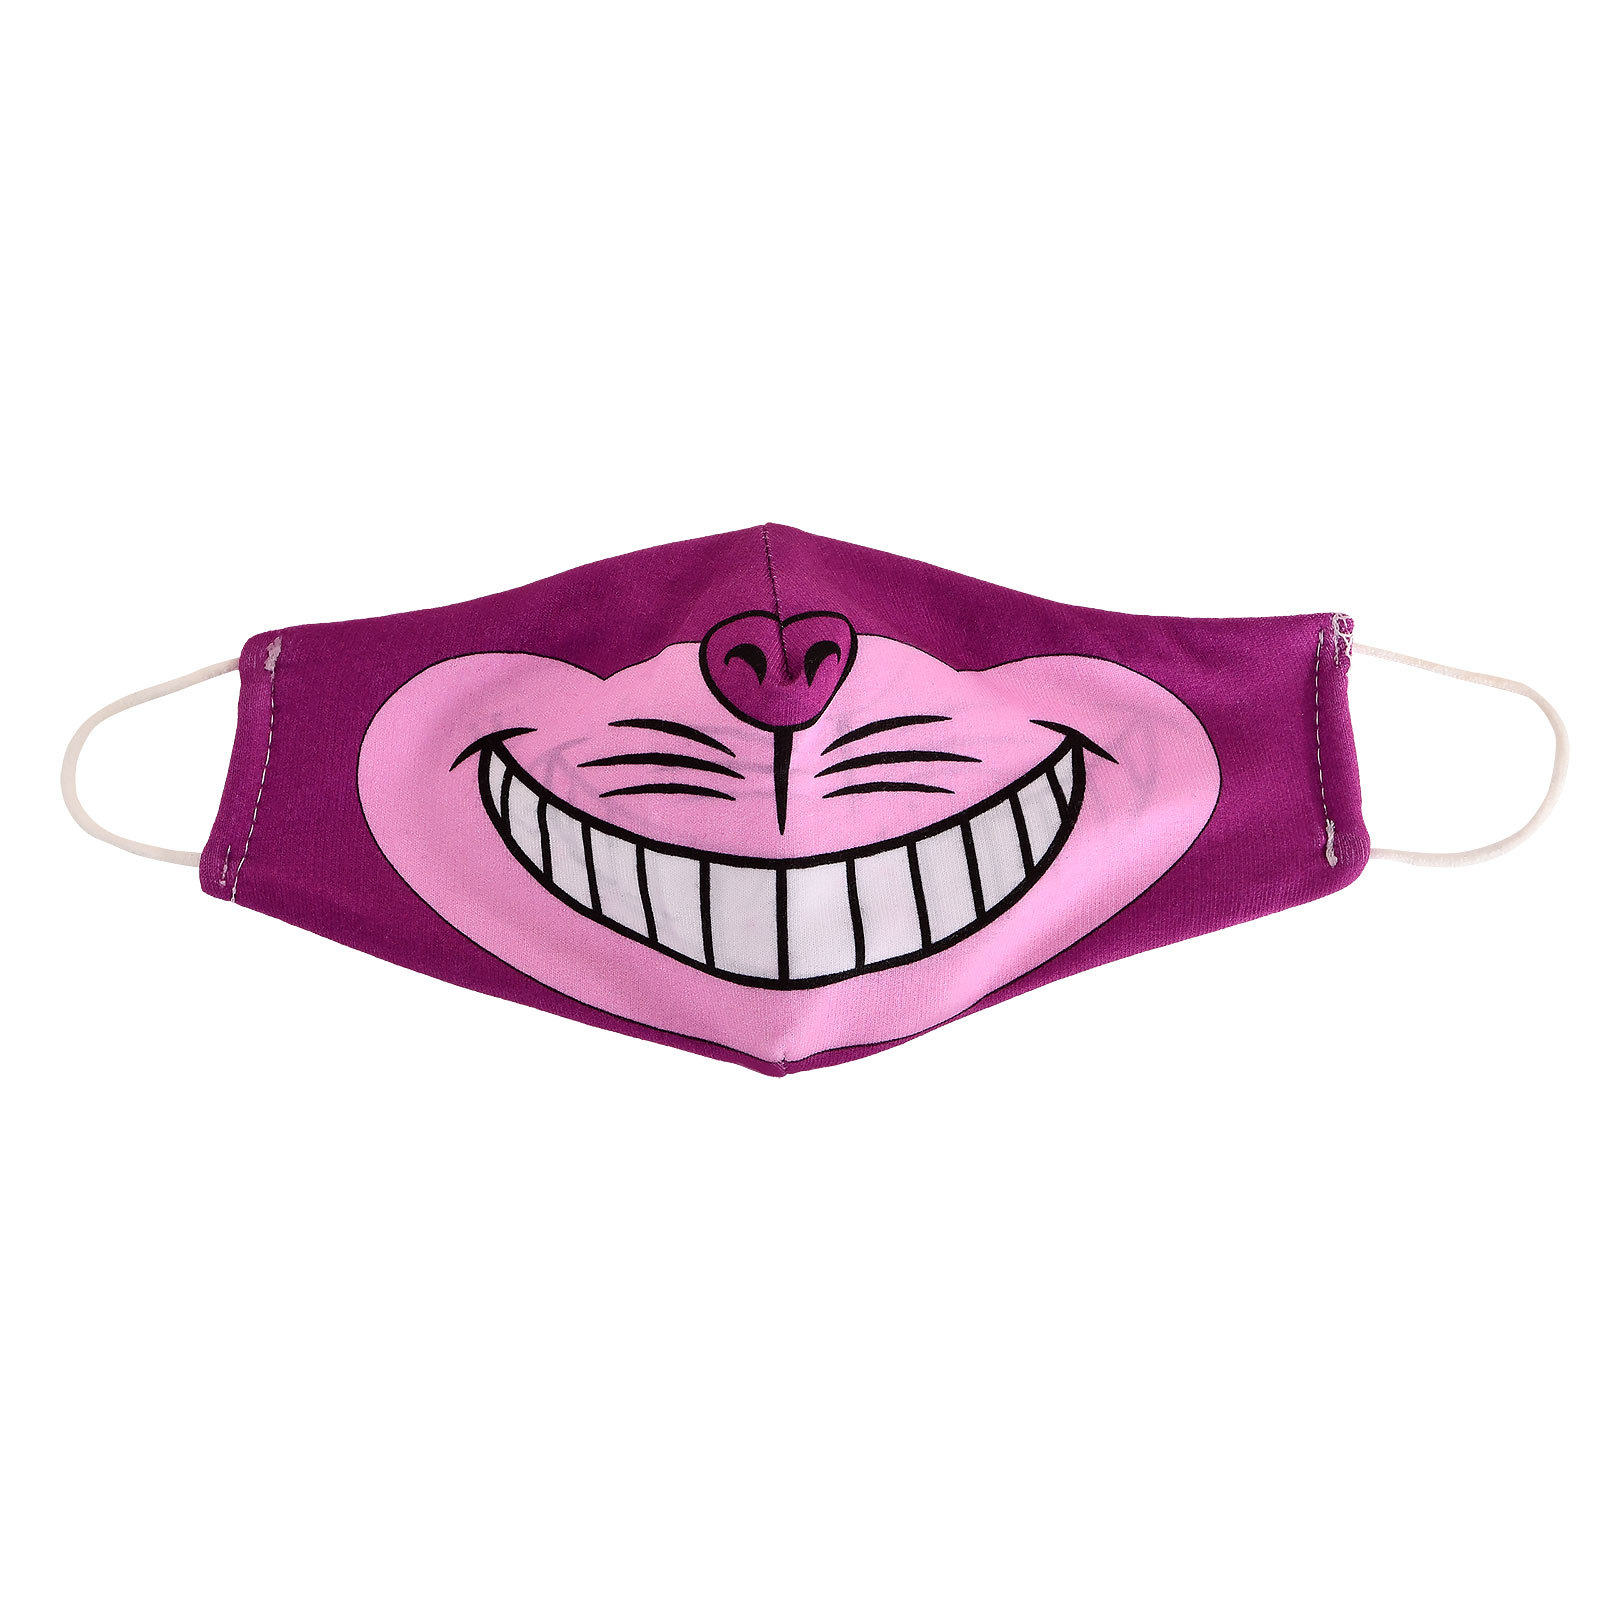 Cheshire Cat Face Mask for Alice in Wonderland Fans Pink